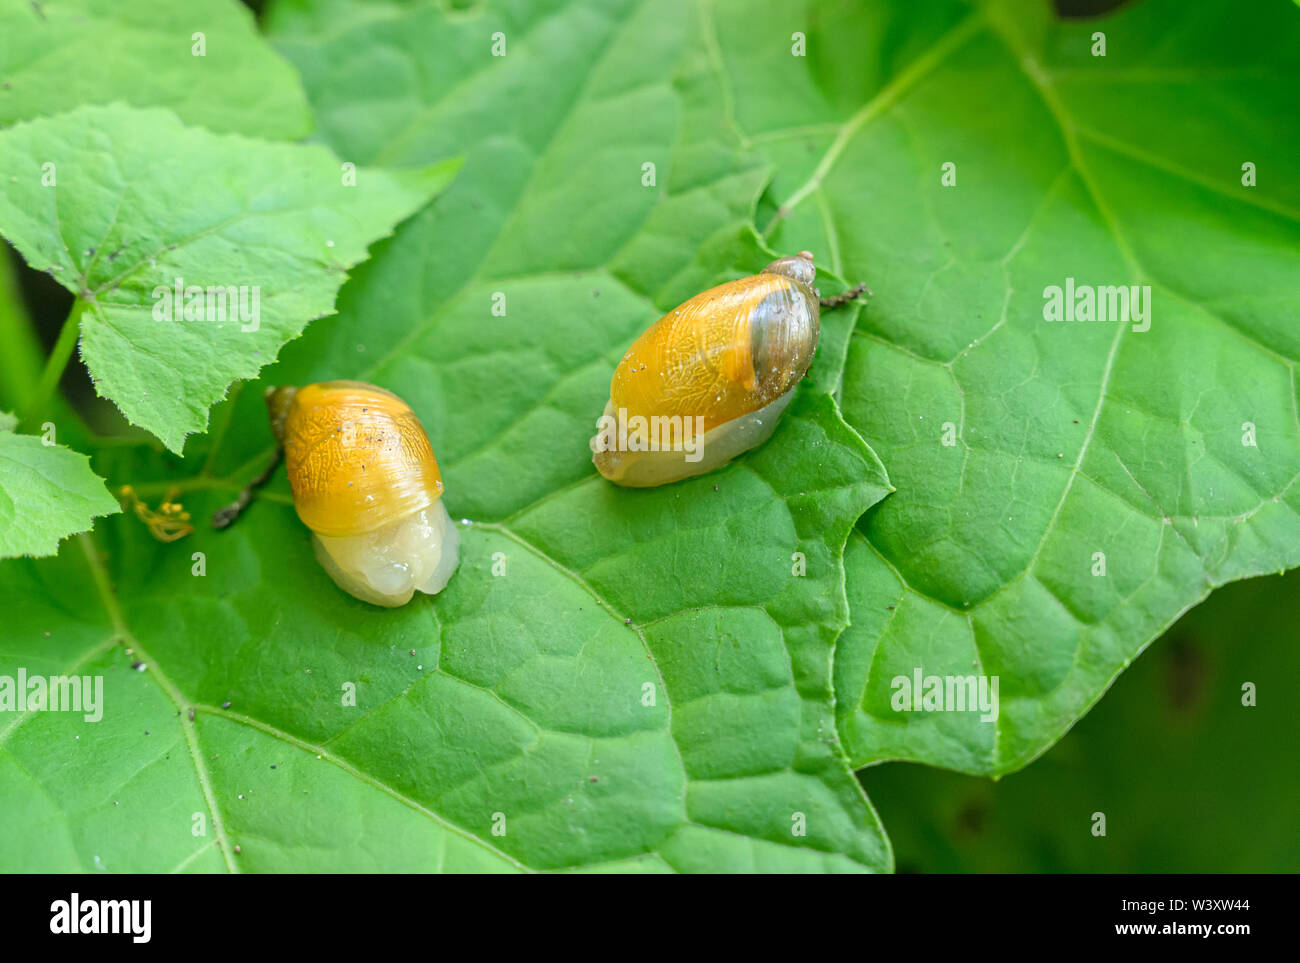 Succinea putris or Amber Snails on green leaf. Stock Photo